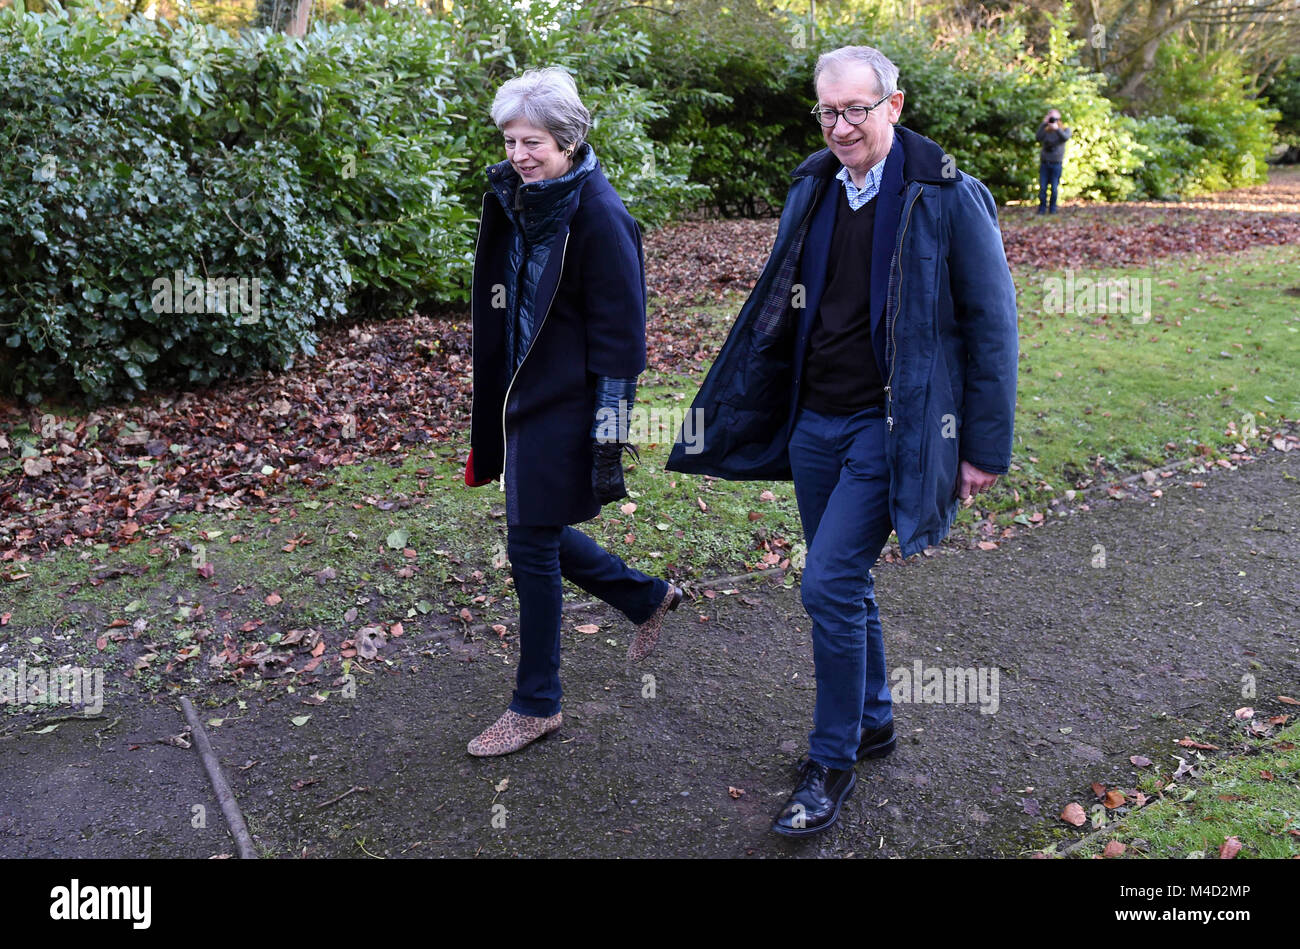 Maidenhead, UK. 11 February 2018. Prime Minister Theresa May, accompanied by her husband Philip, attends a church service near her Maidenhead constituency. Stock Photo